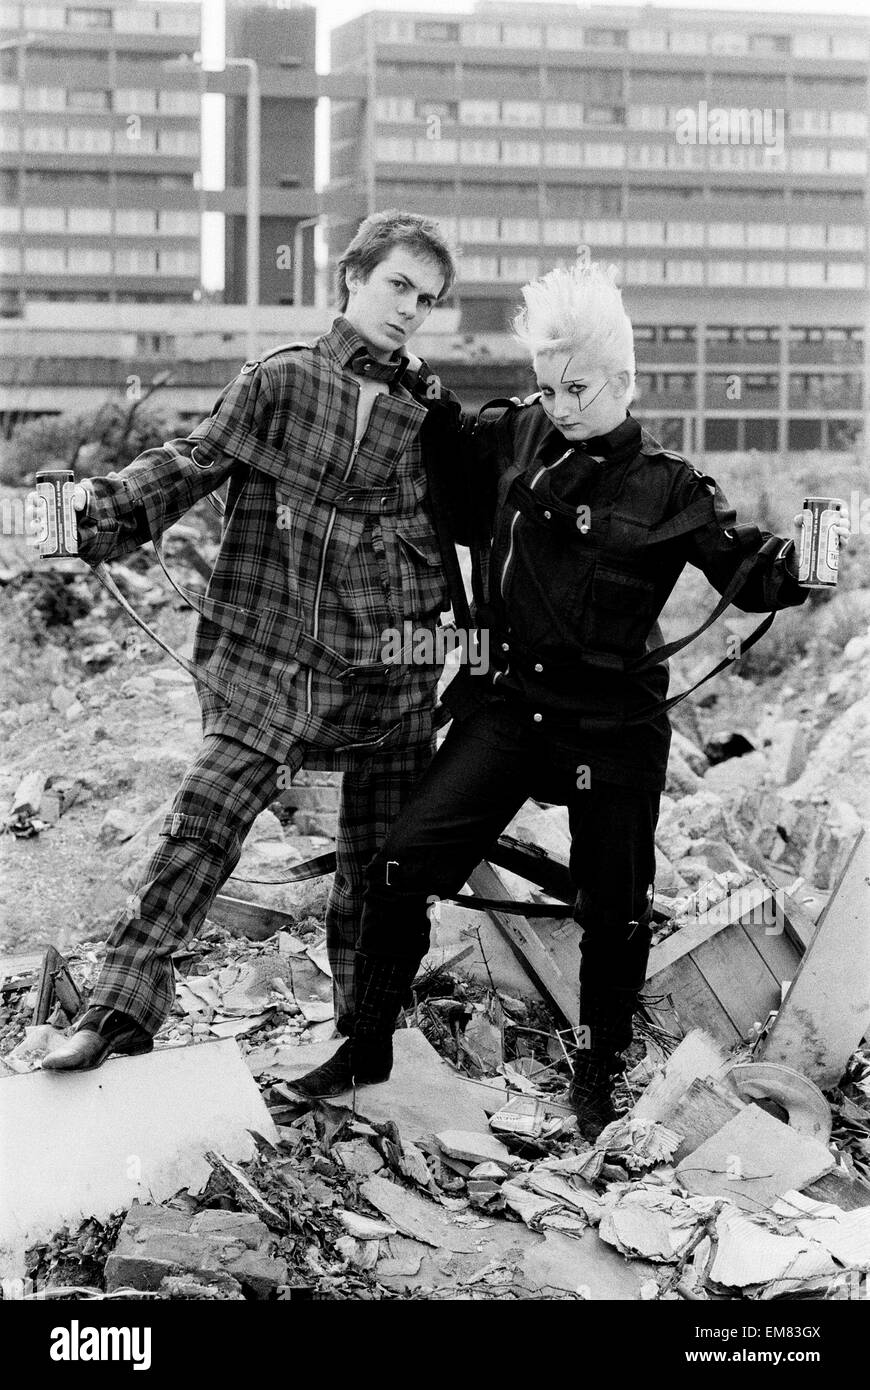 Punk Rock fashion hits the high street. Clothing from Seditionaries on King's Road, London. 18th May 1977. Stock Photo